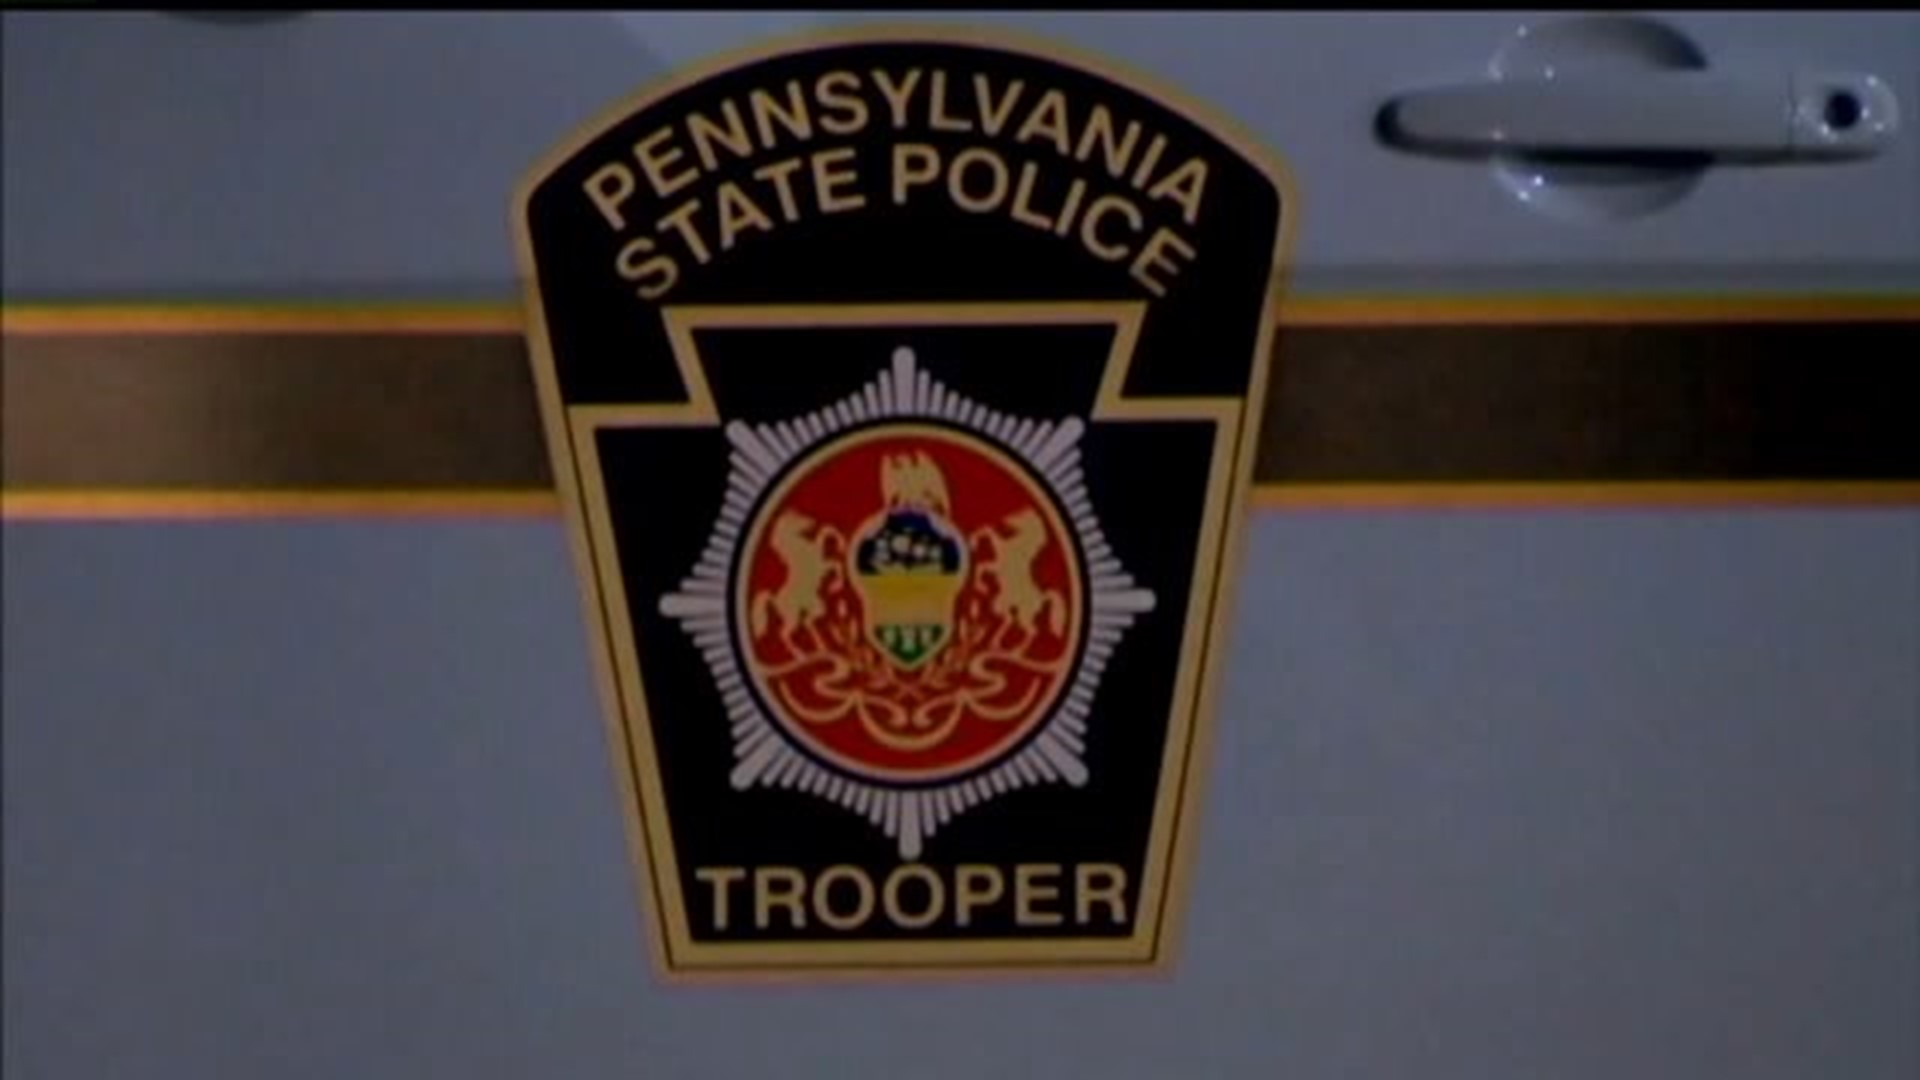 A public viewing for a Pennsylvania State Trooper killed in the line of duty will take place today